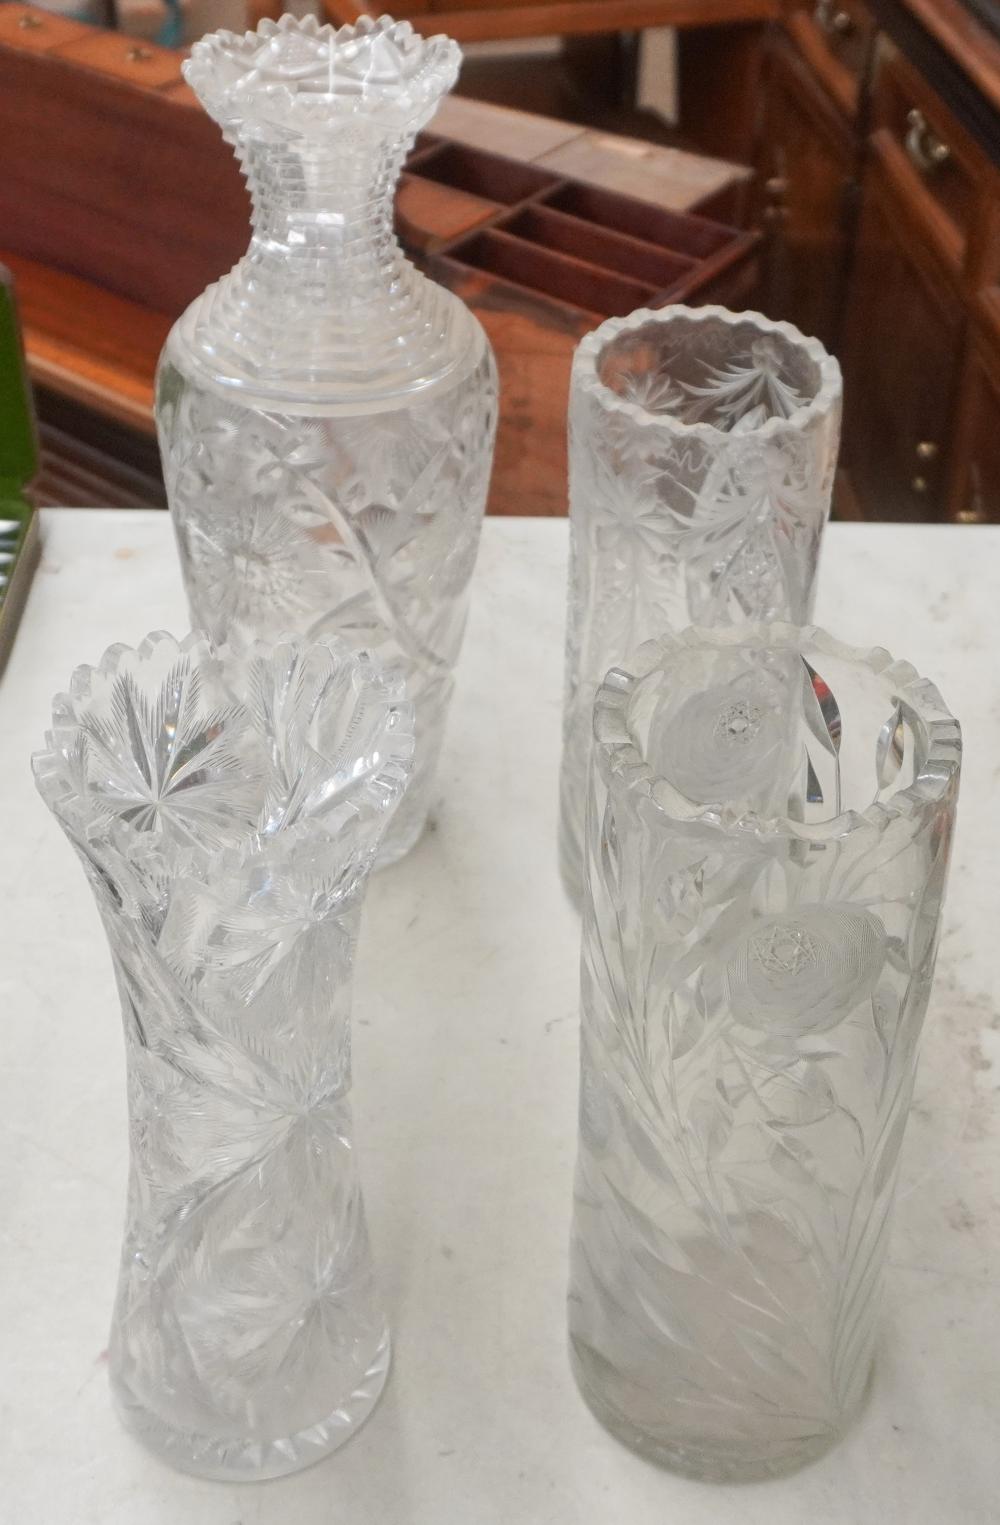 FOUR CUT GLASS VASES, H OF TALLEST: